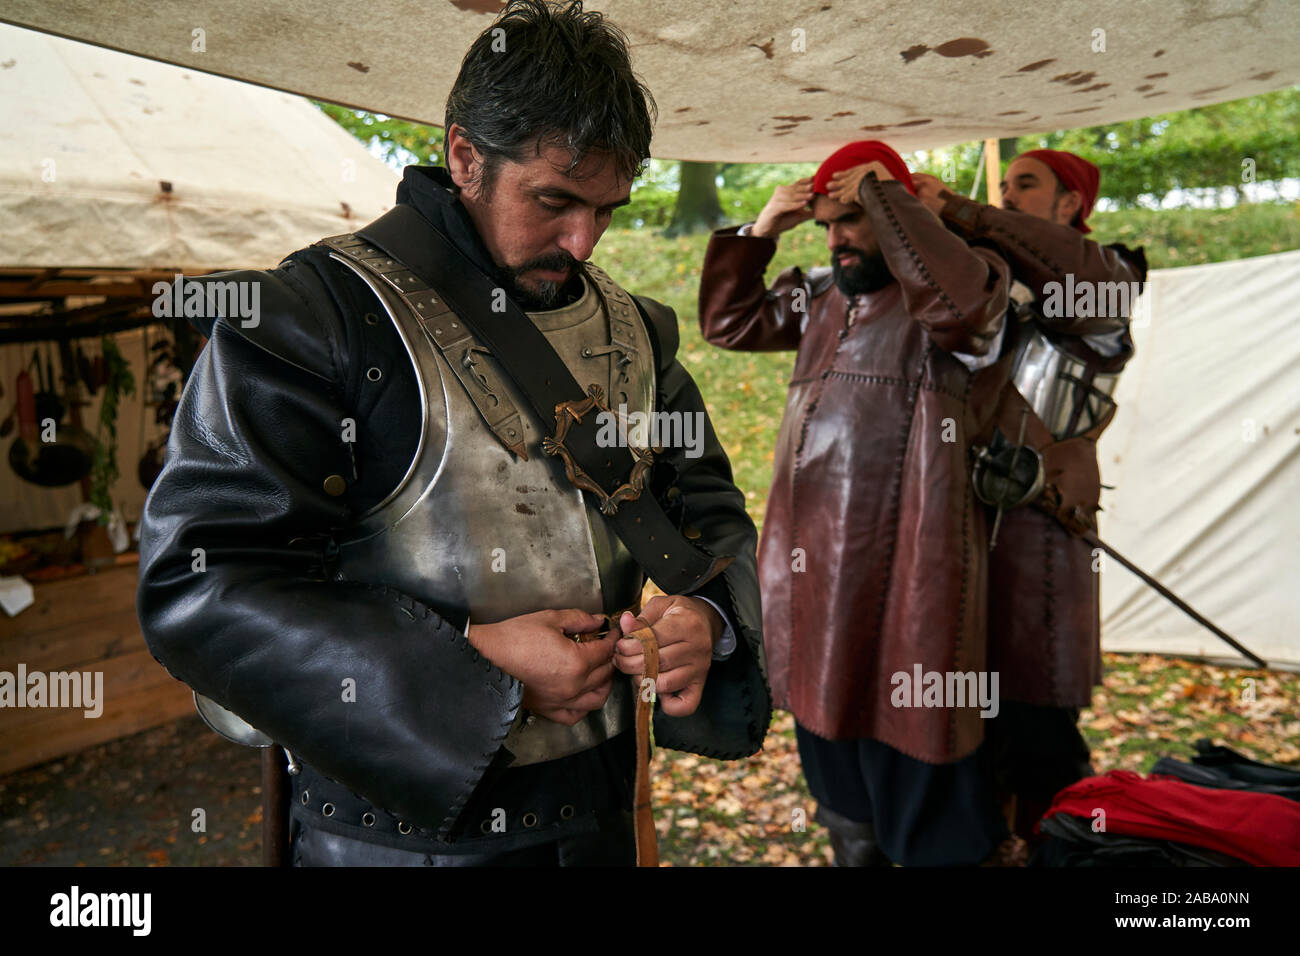 Participants of the event prepare their costumes of Spanish soldiers Stock Photo